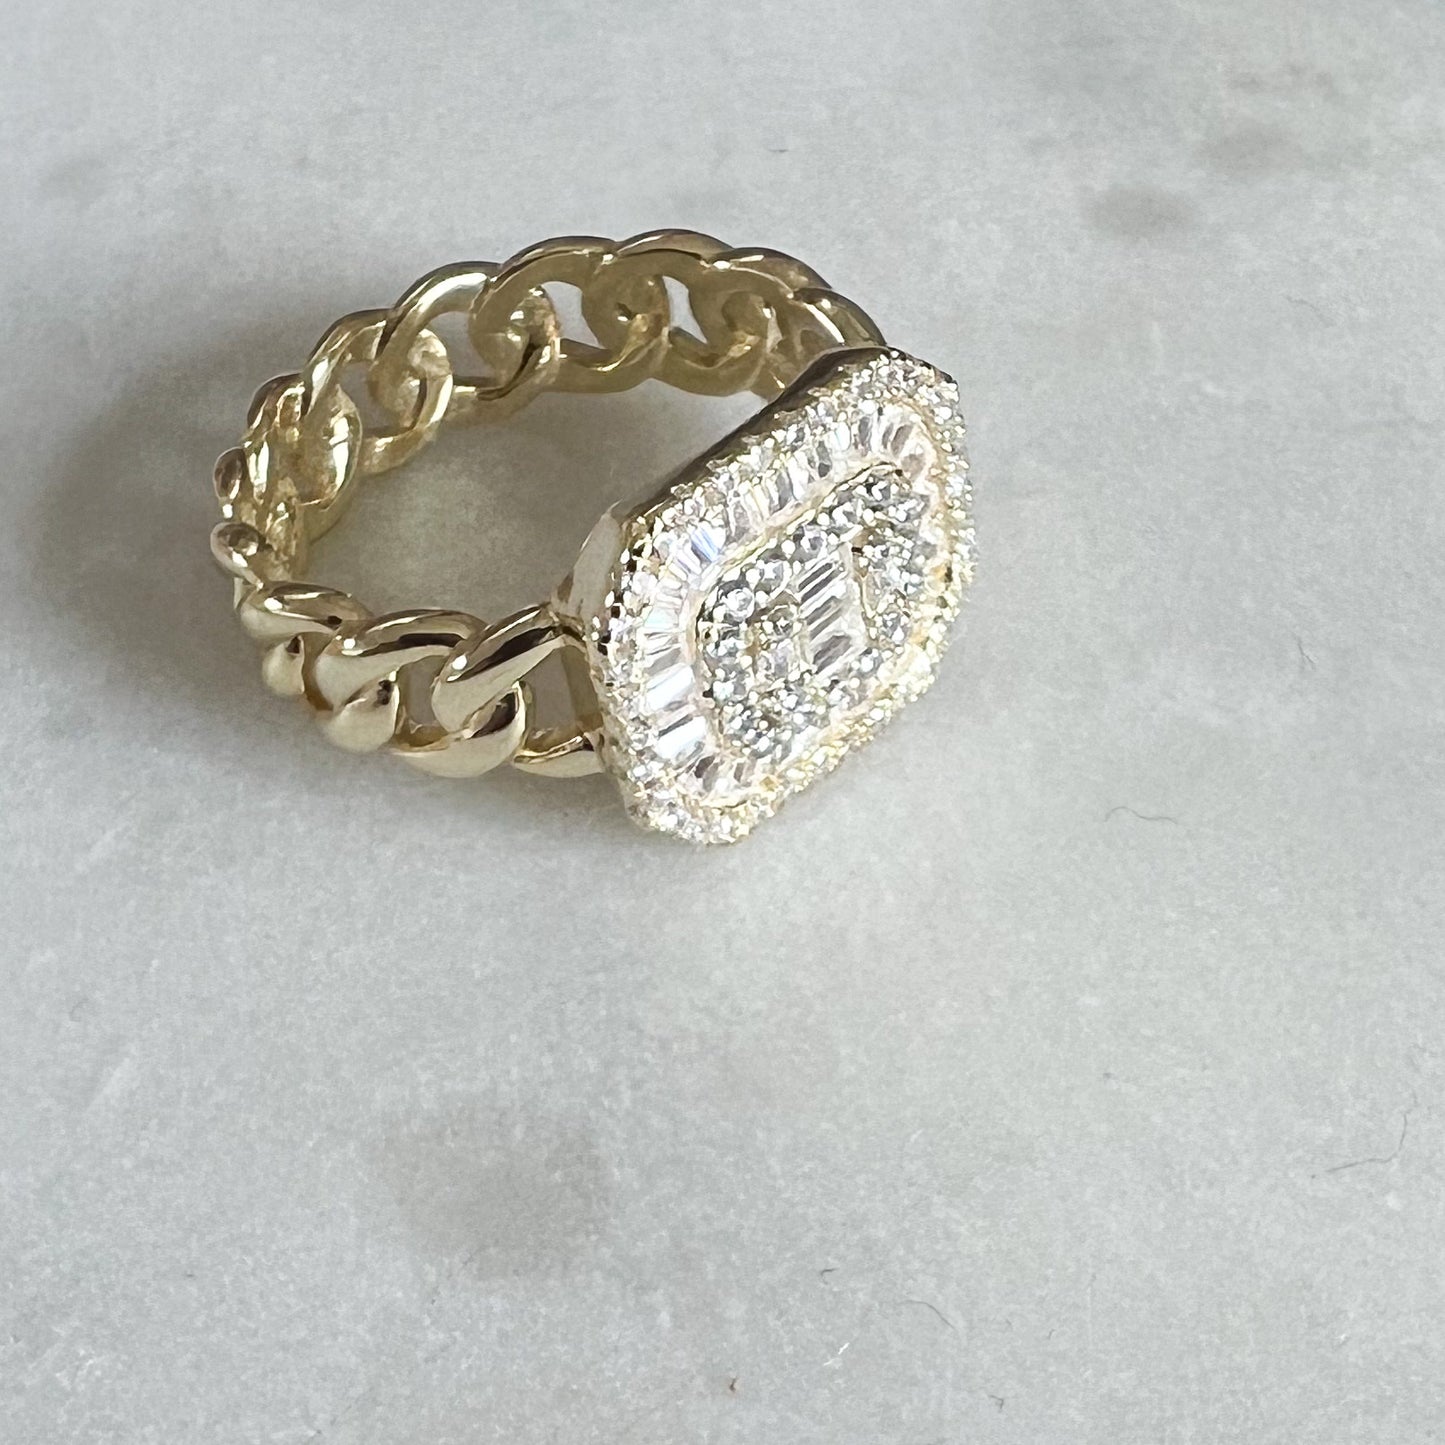 Baguette Box Gold Sterling Silver 925 Ring Size 7 - BelleStyle